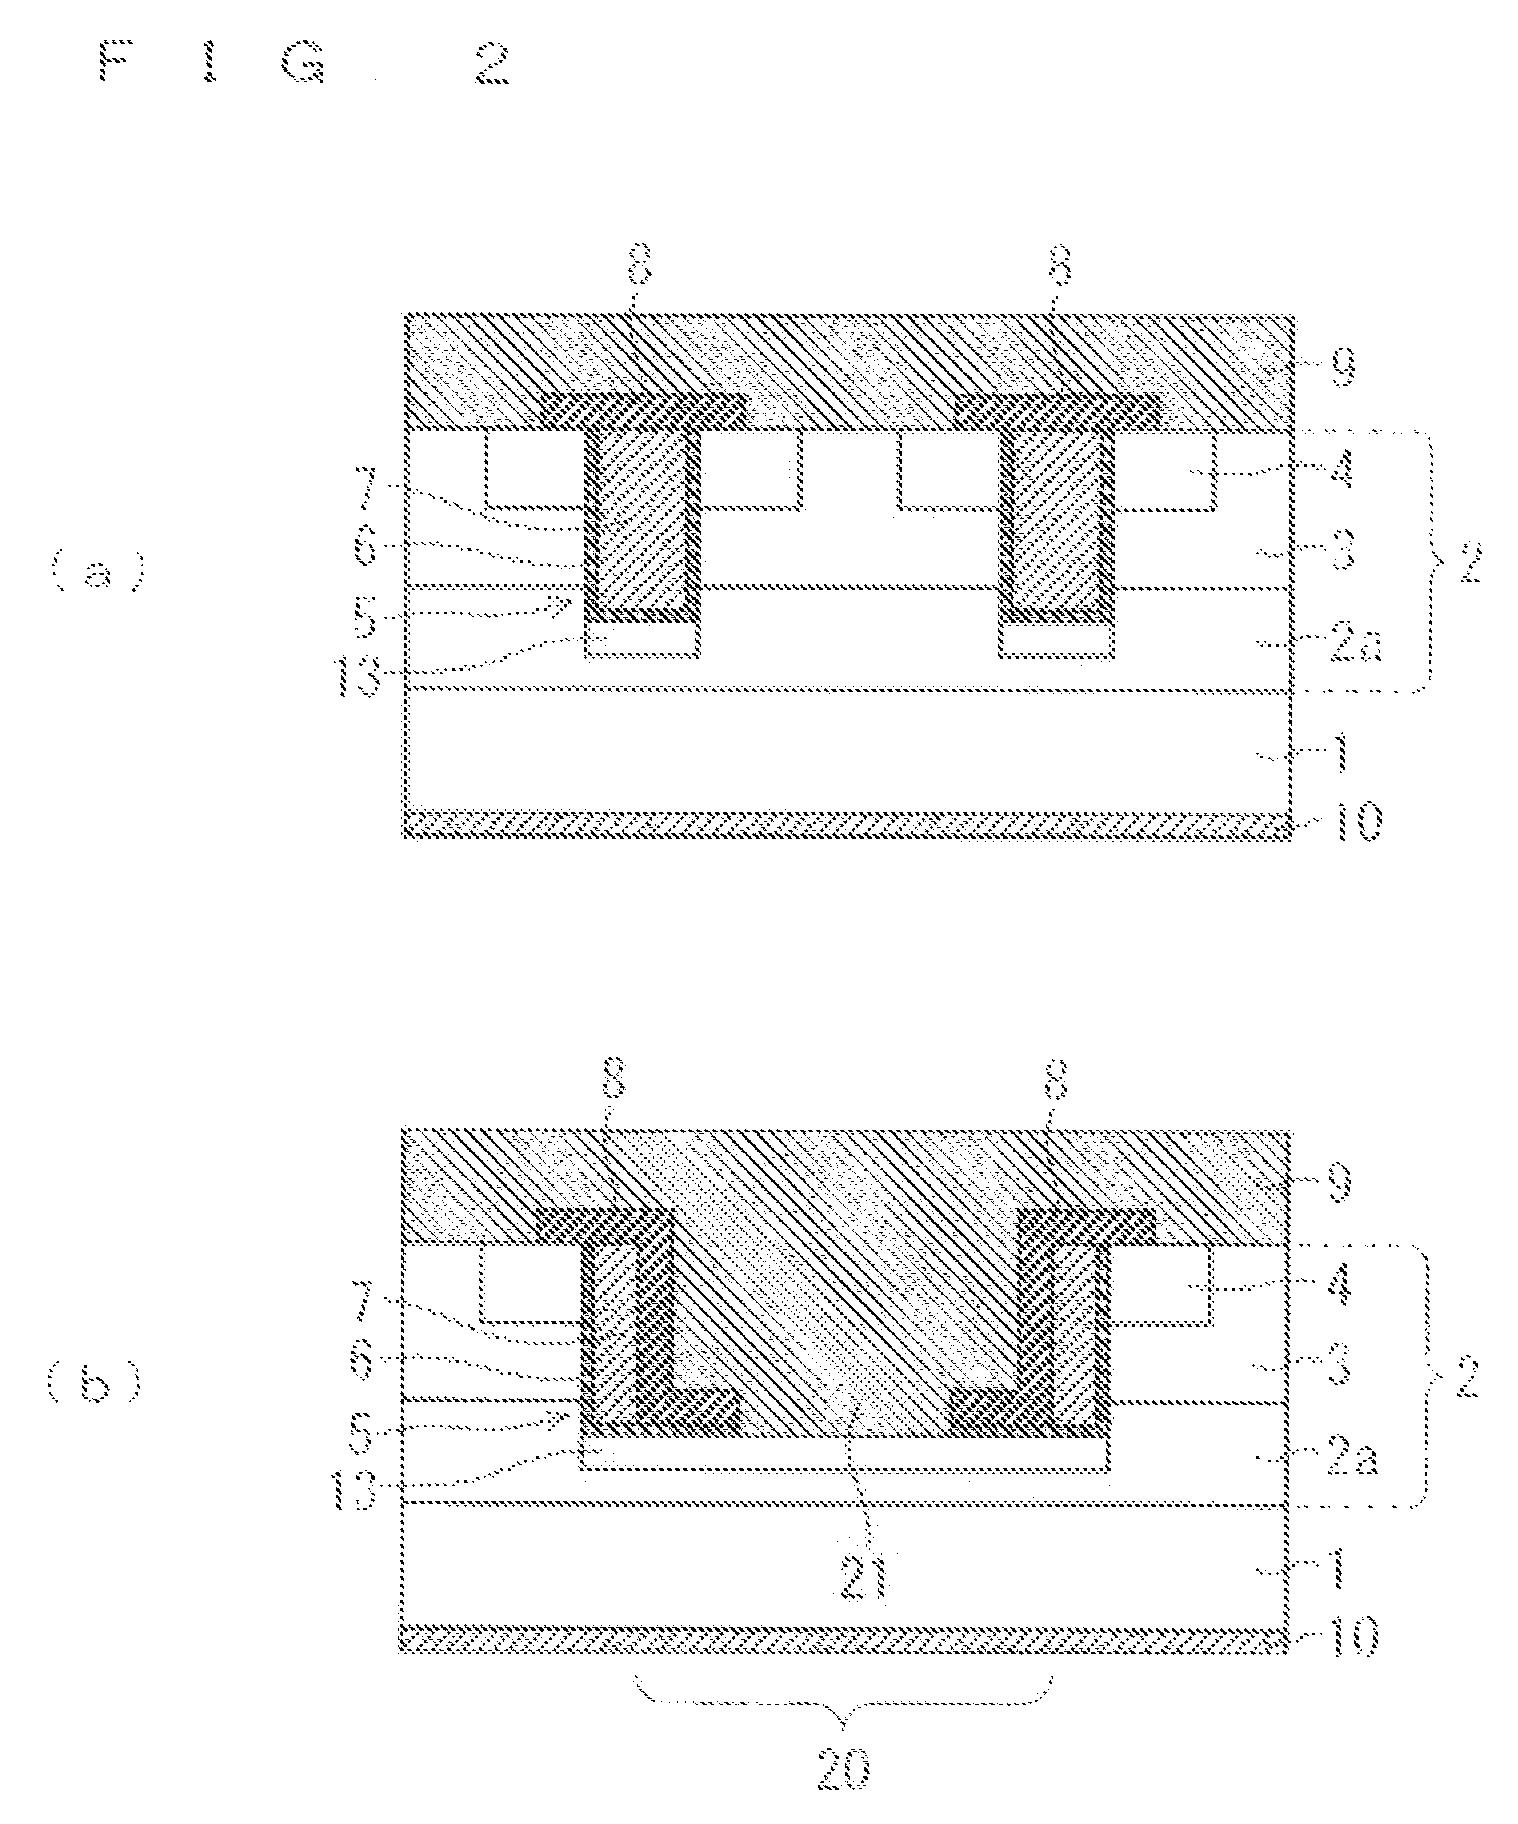 Trench-gate type semiconductor device and manufacturing method therefor